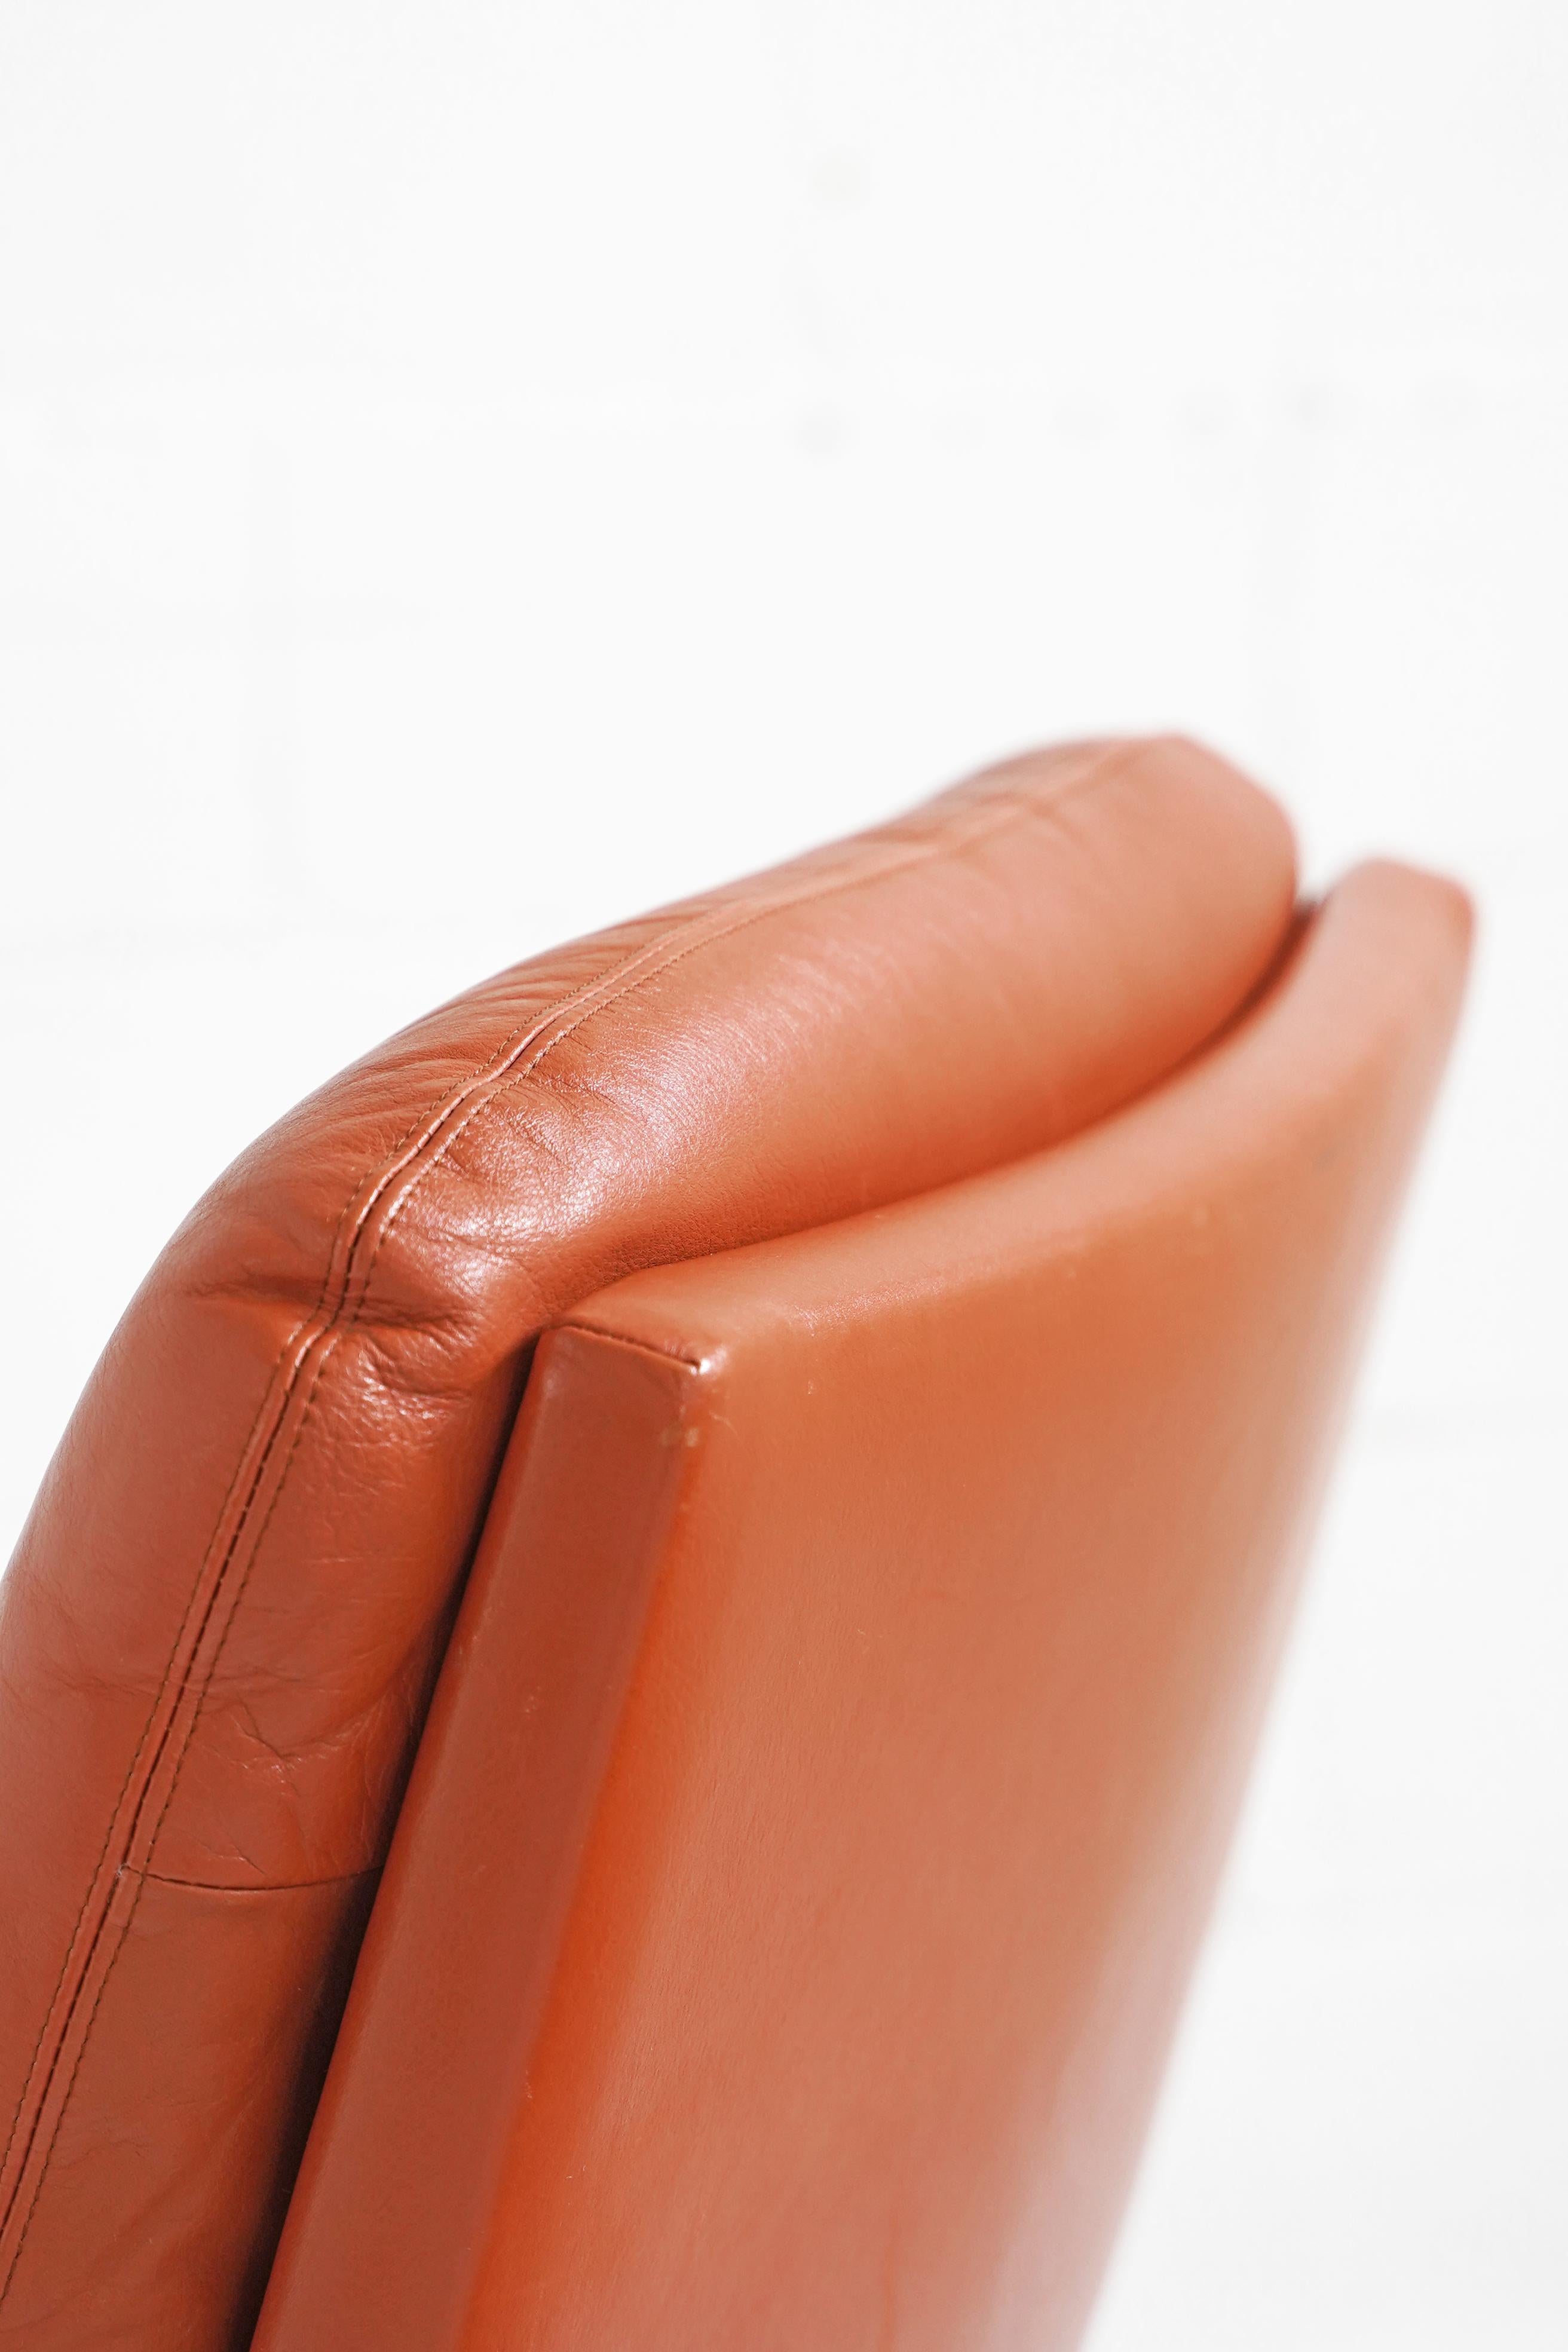 Palma Lounge Chair in Original Leather by Werner Langenfeld for ESA 1